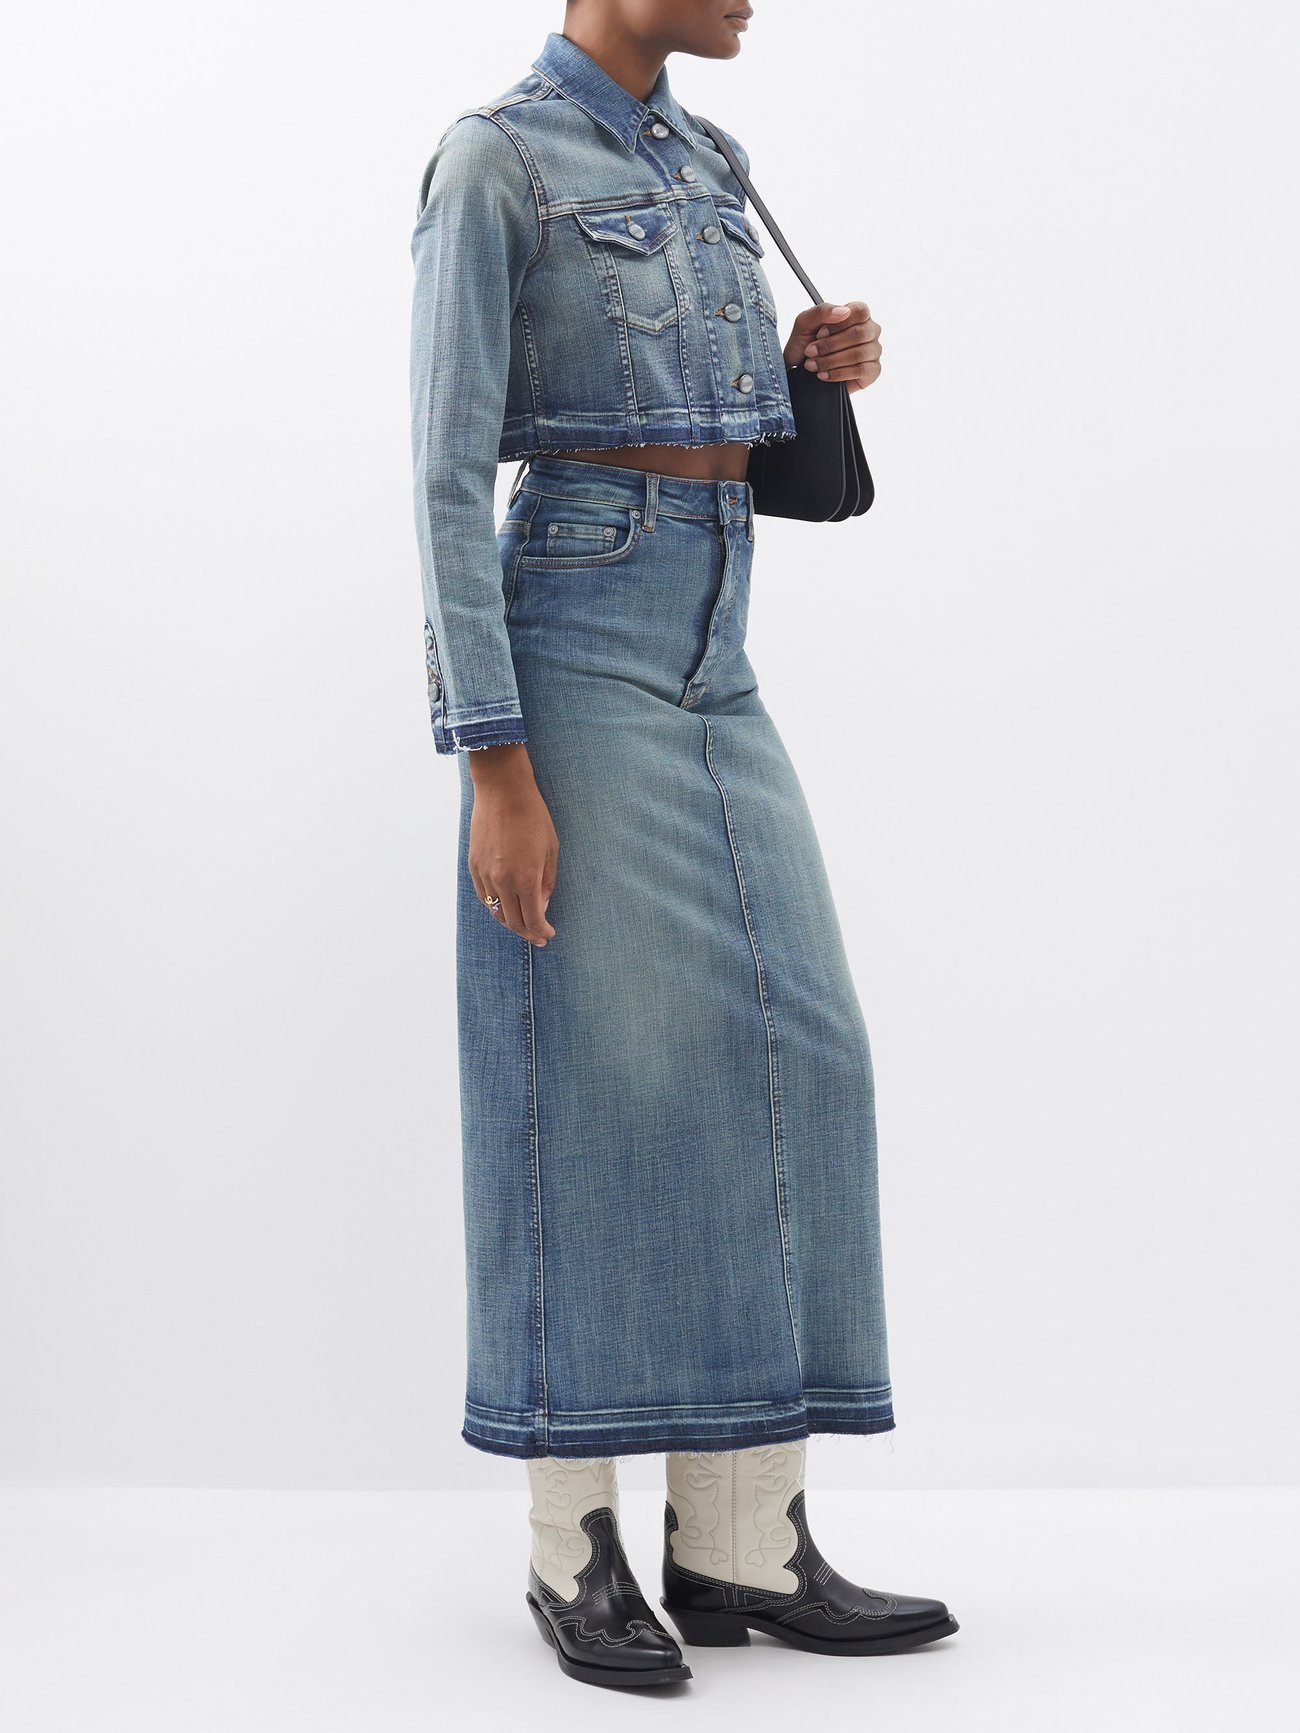 The 2023 Denim Trends to Refresh Your Look This Spring/Summer - Found